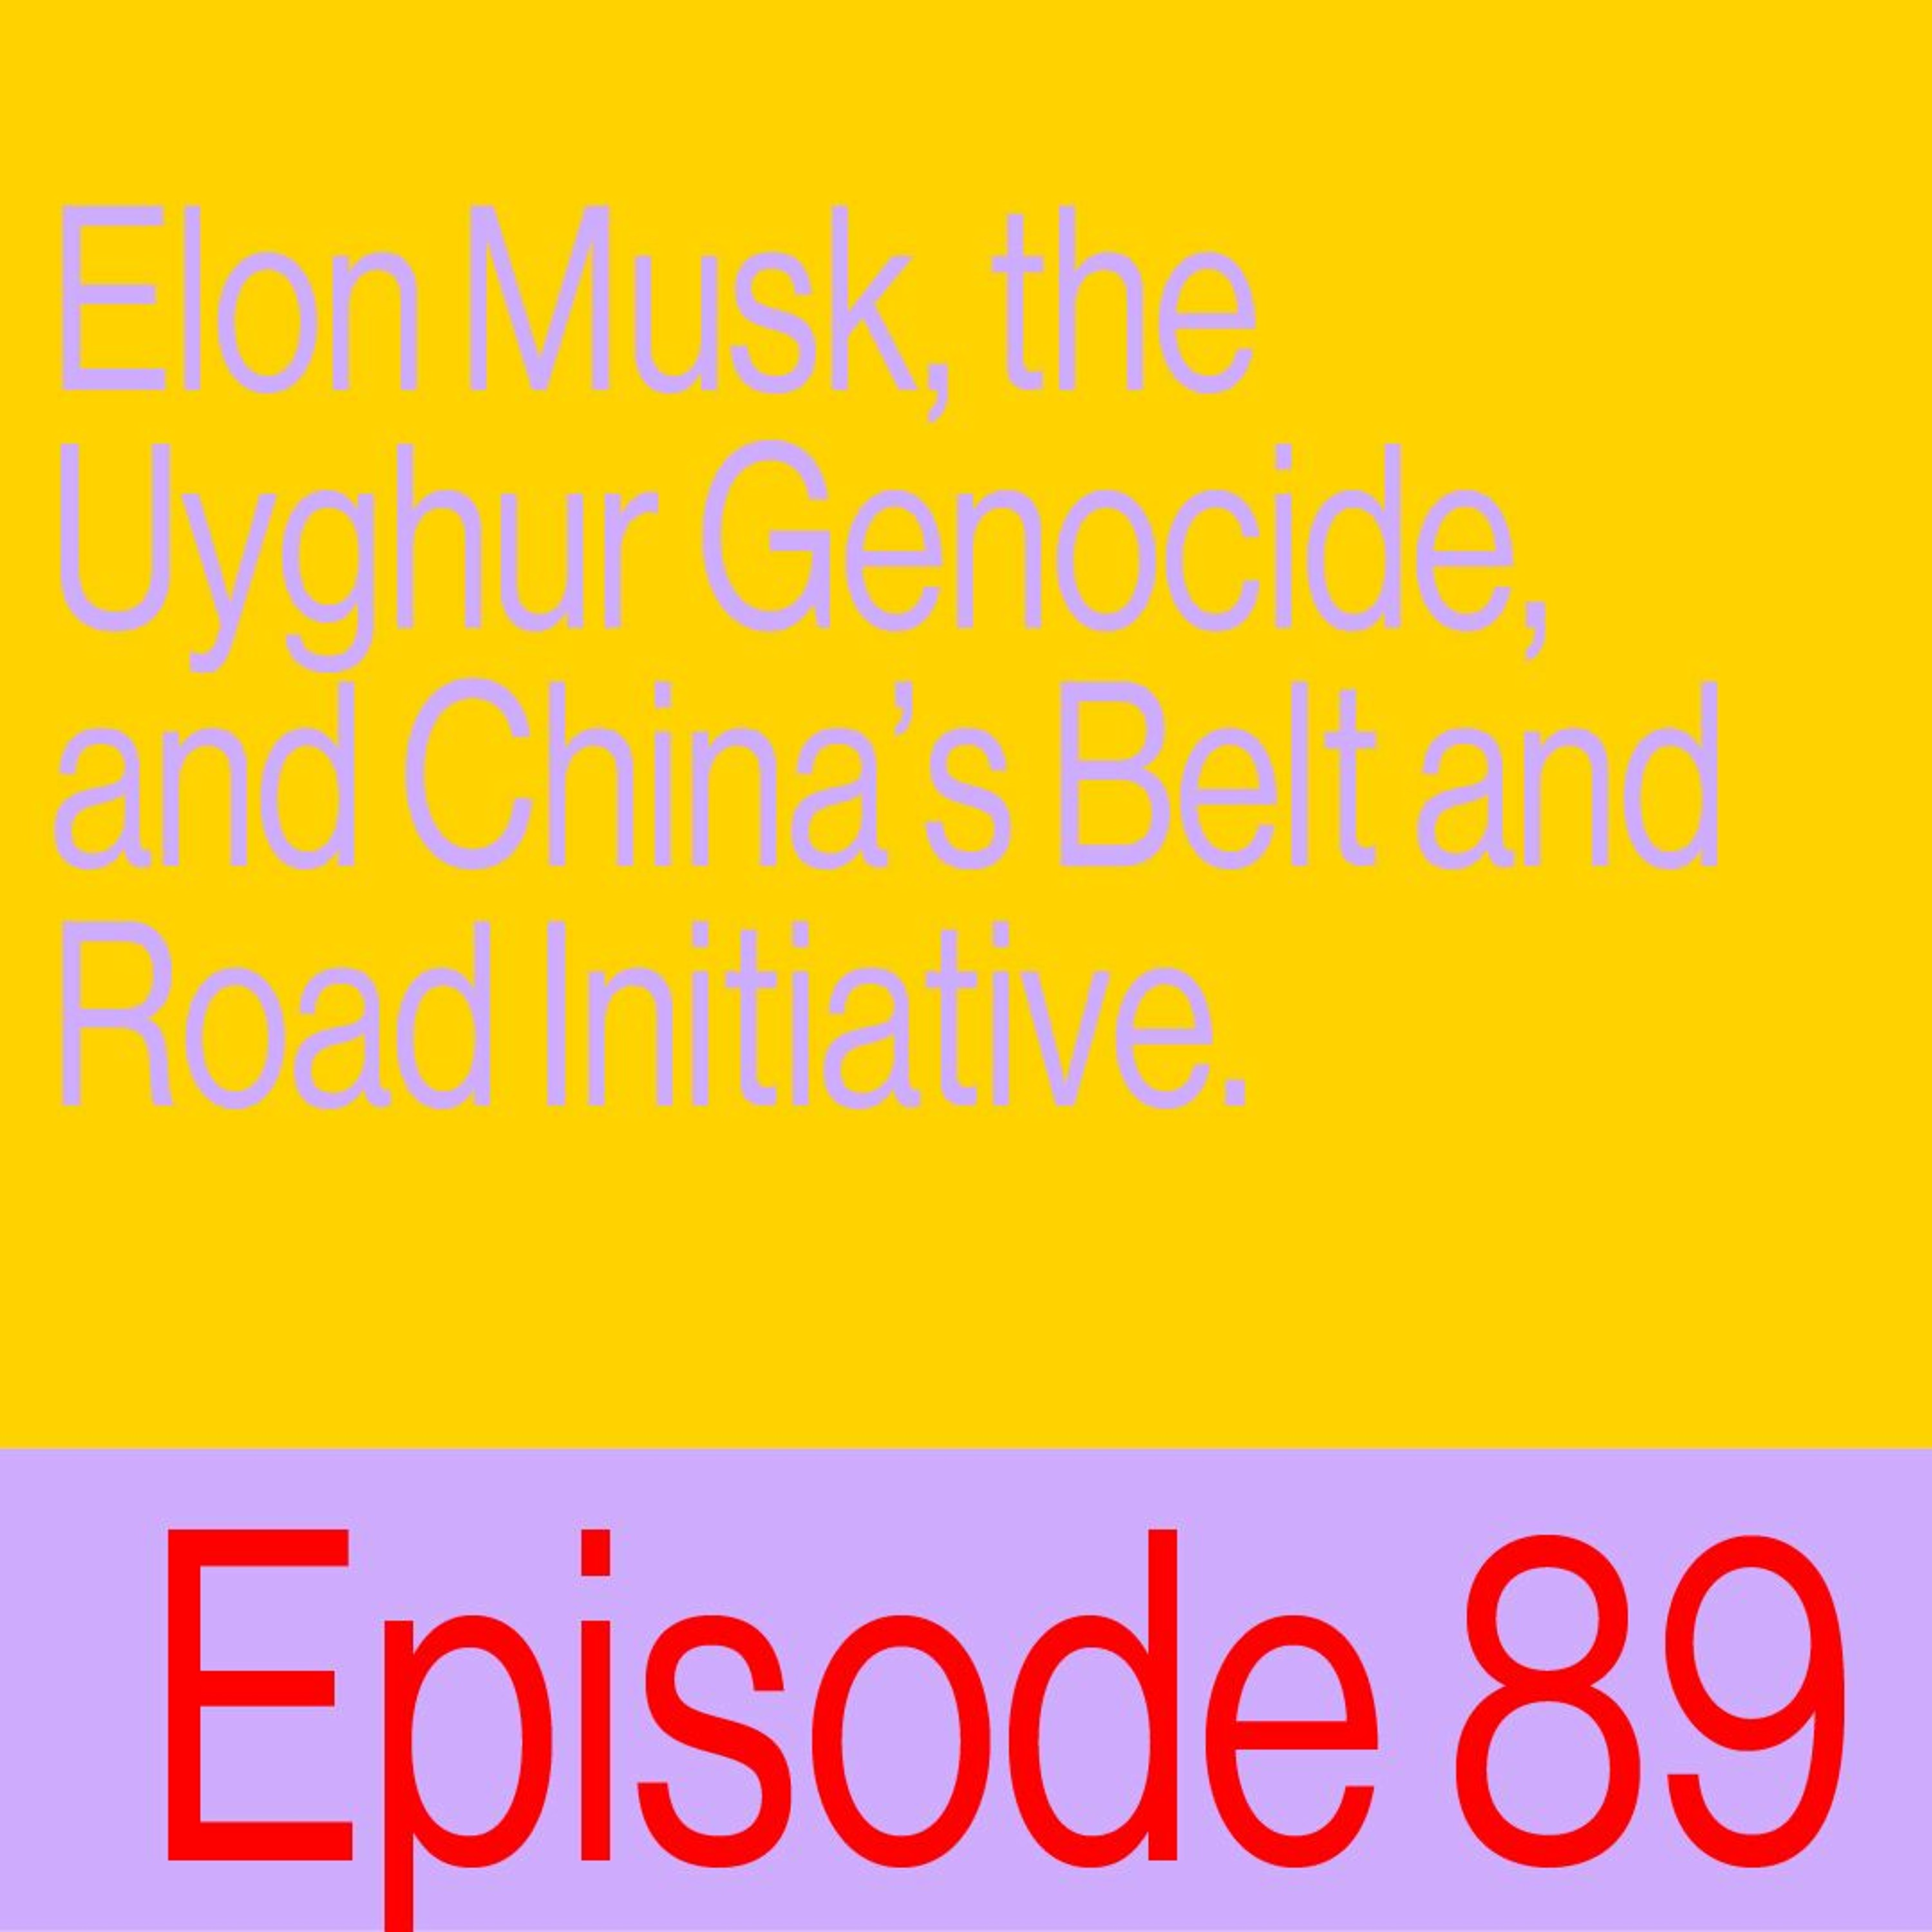 Episode 89: Elon Musk, the Uyghur Genocide and China’s Belt and Road Initiative